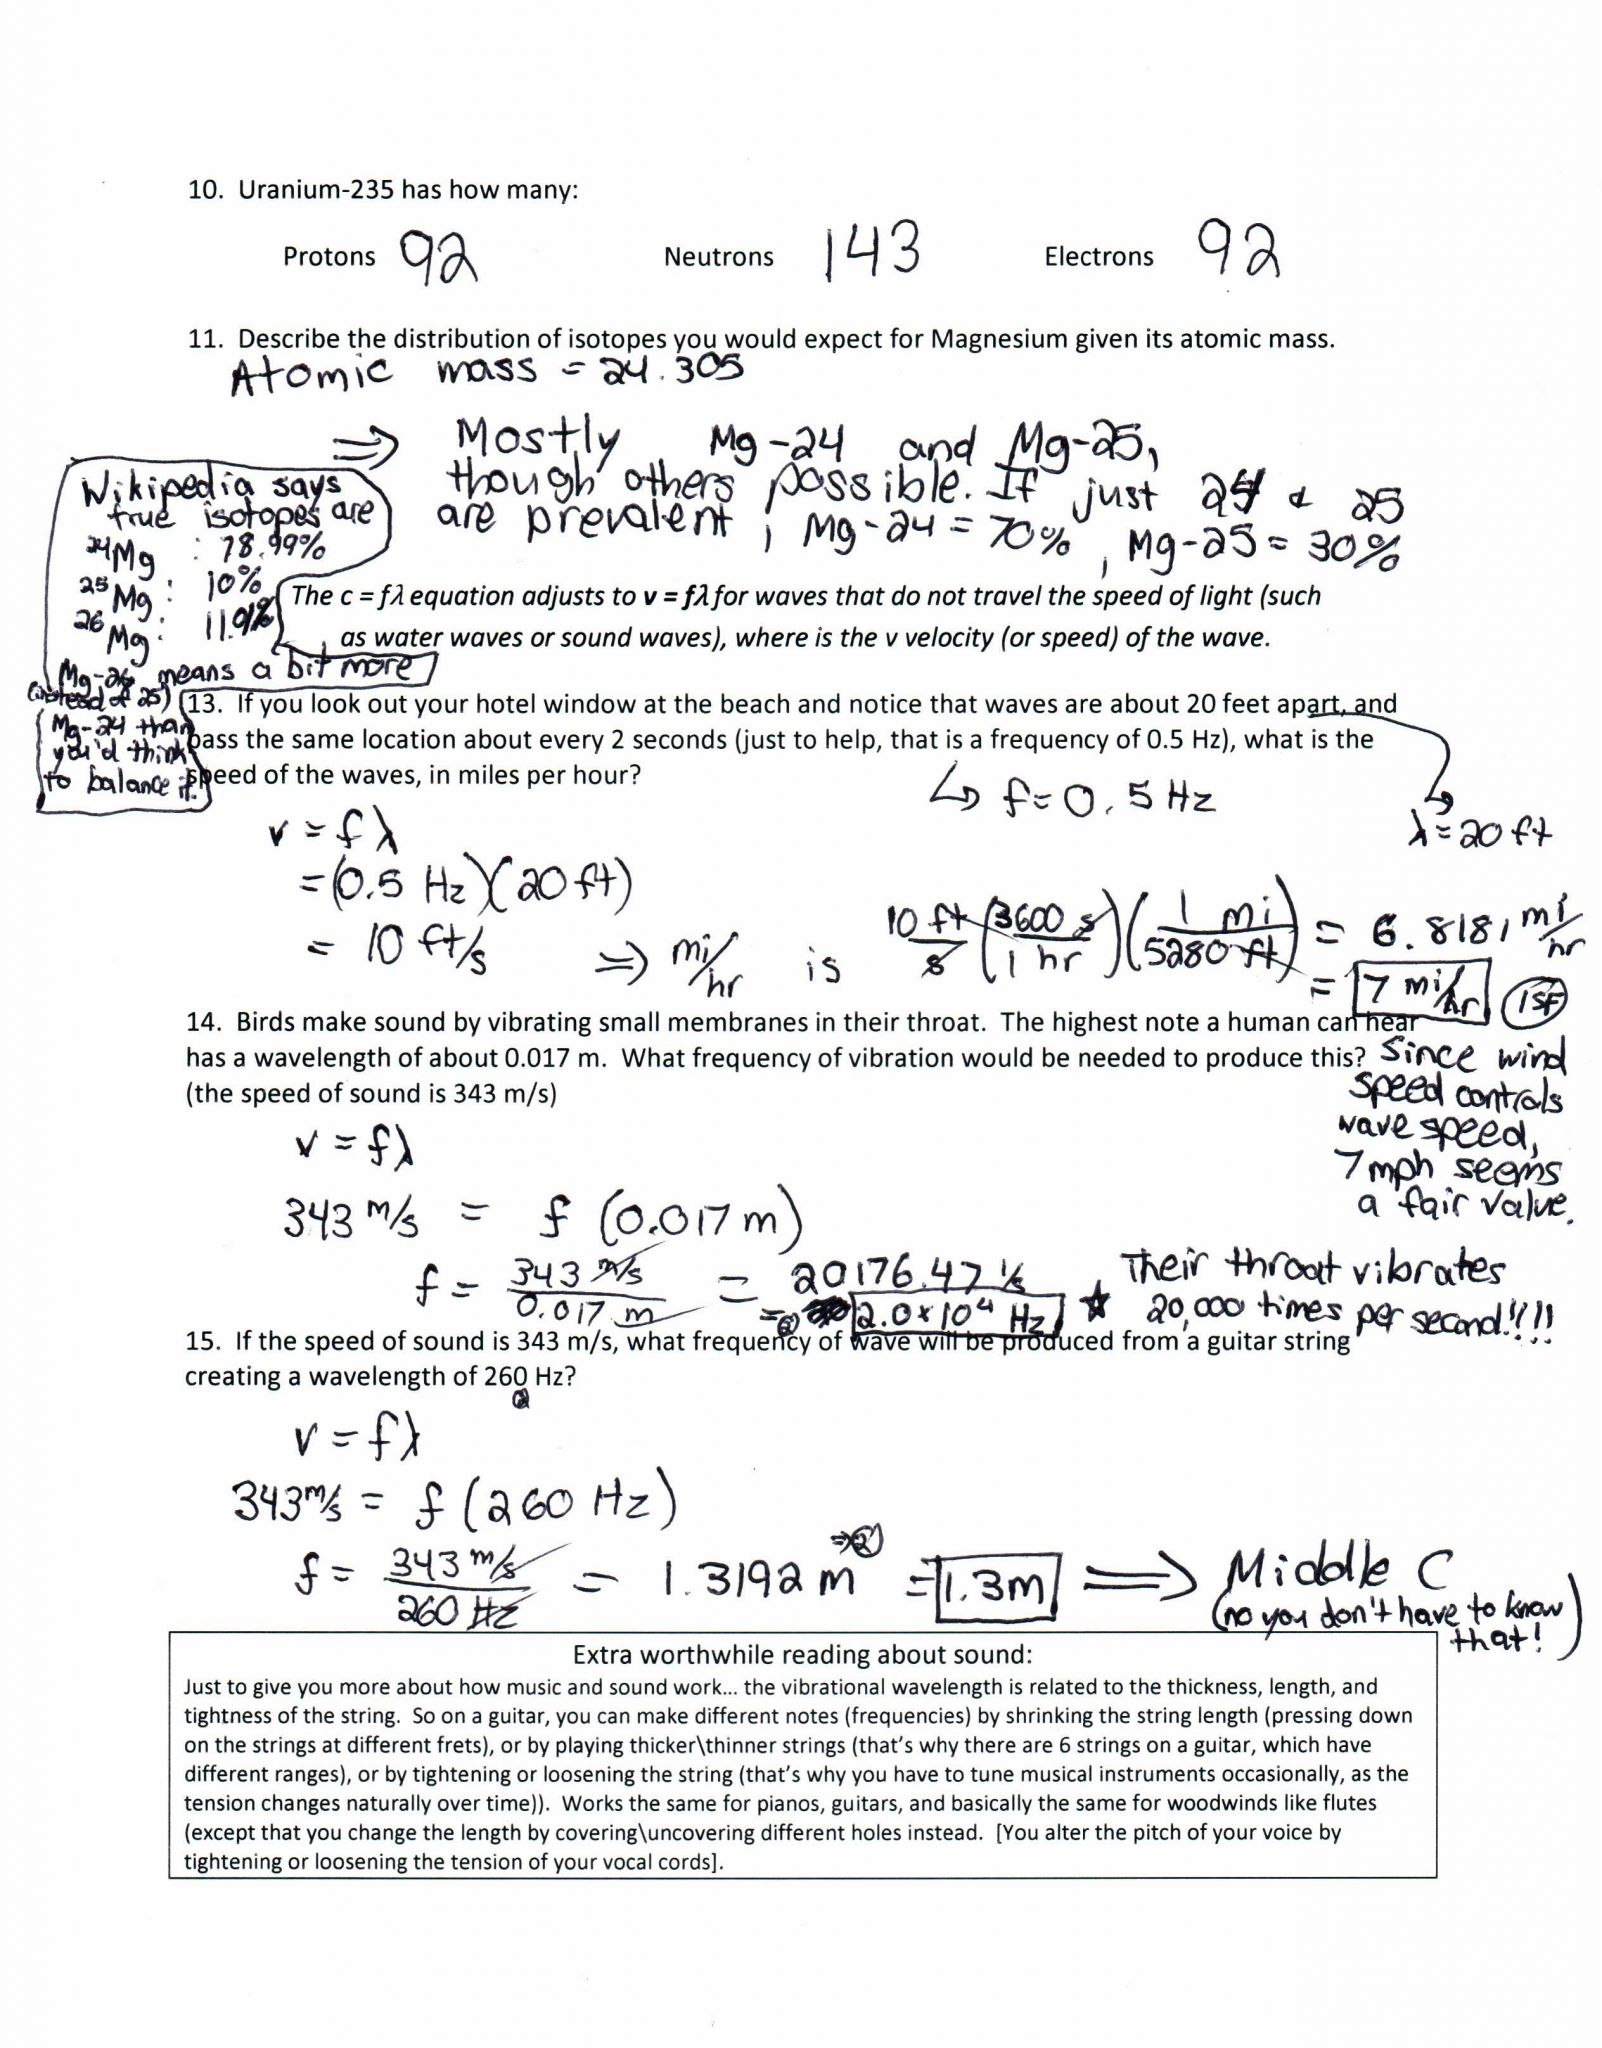 An Inconvenient Truth Worksheet Answers as Well as Ideal Gas Law Worksheet Answers Gallery Worksheet Math for Kids